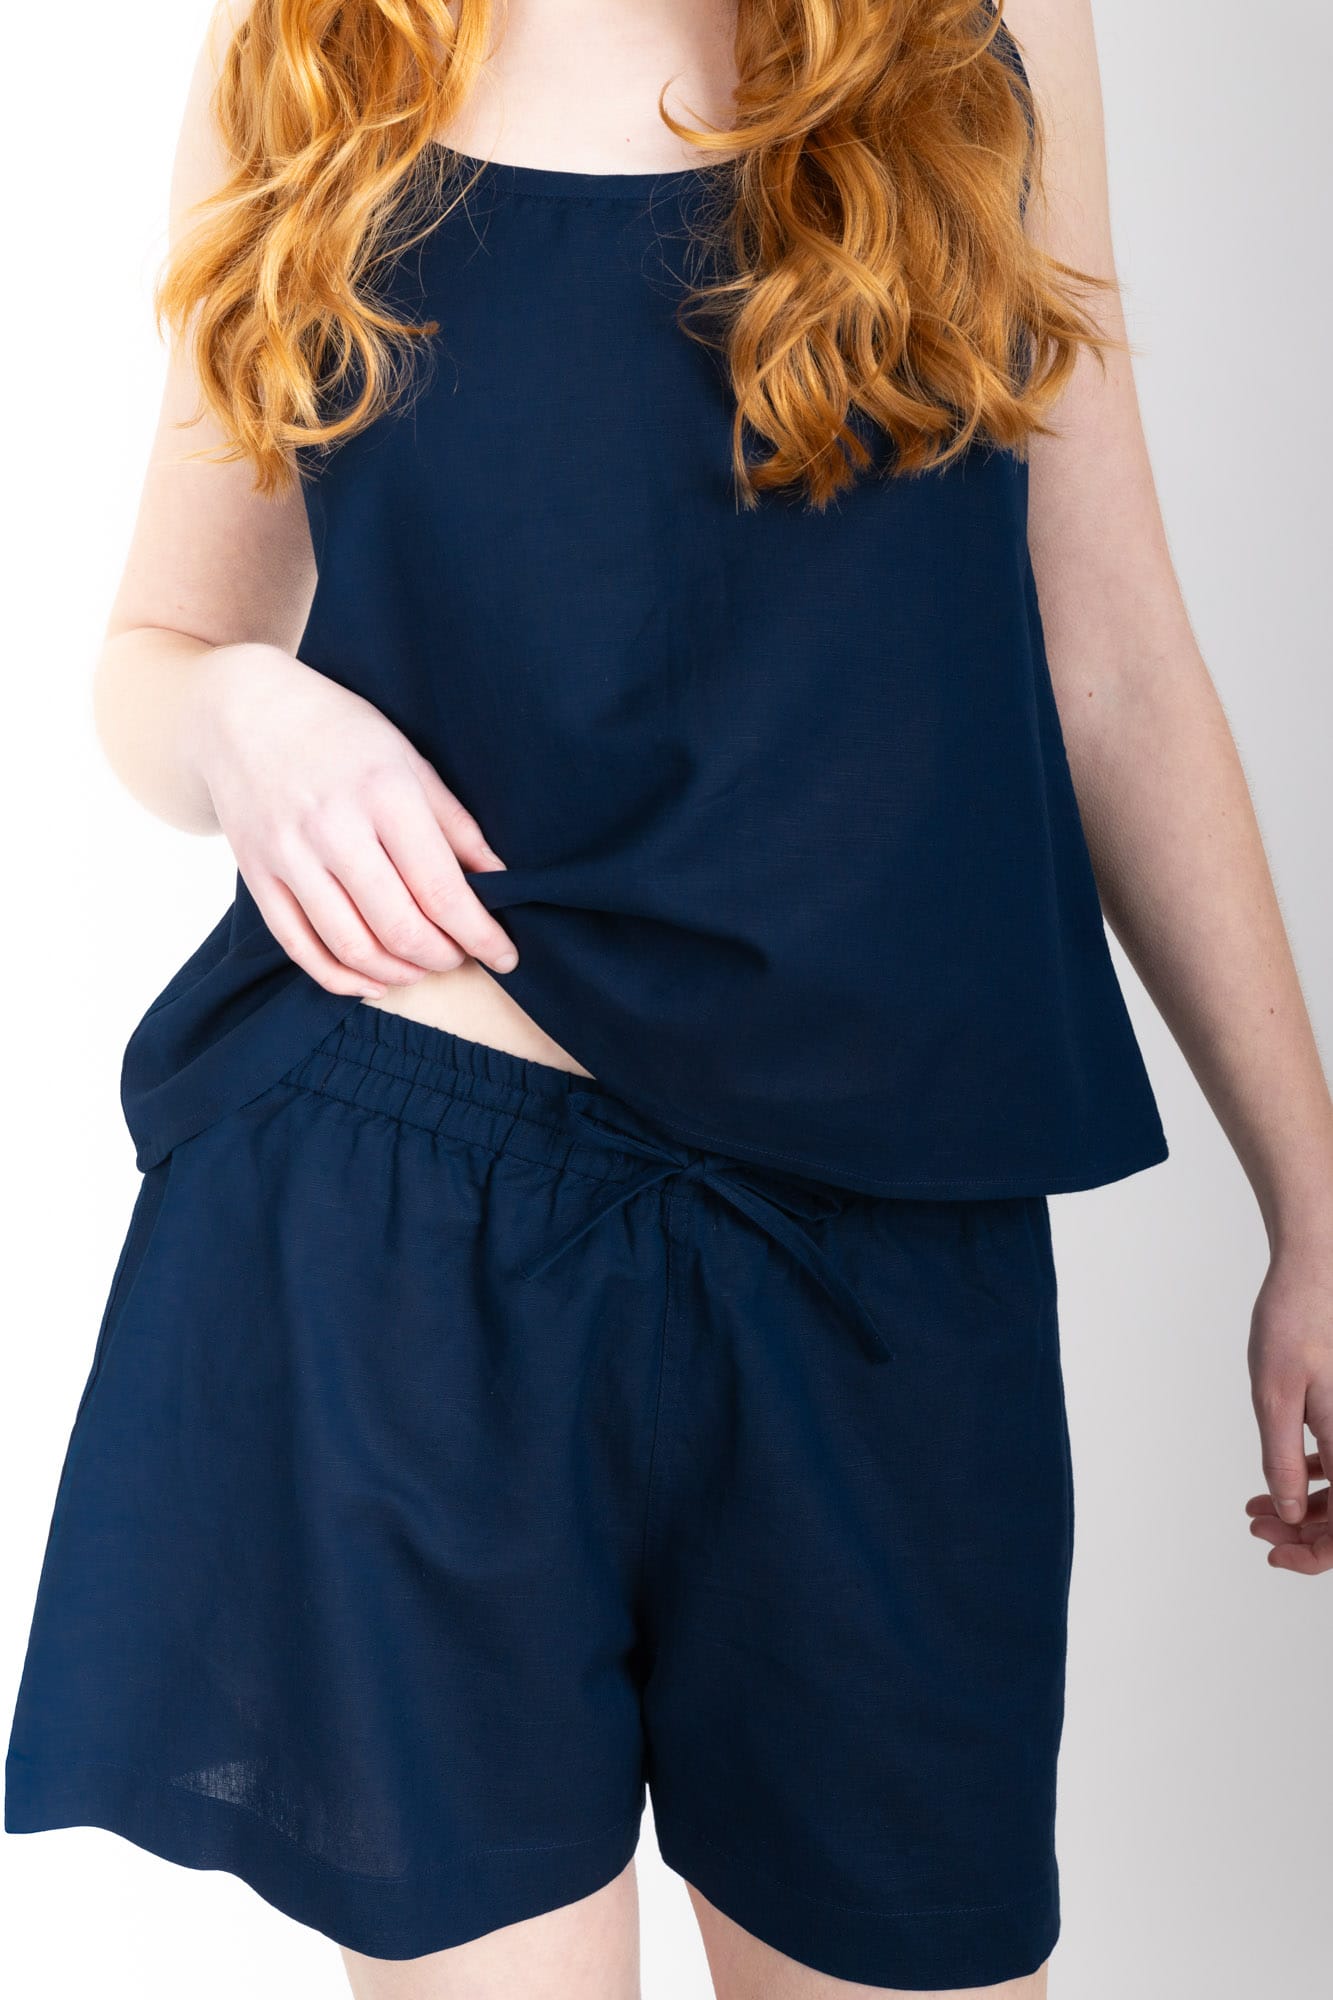 General Sleep Summer Set with a swing-style camisole,  with shorts with elasticated-waistband  and drawstring detail. 55% organic cotton and 45% linen blend, in Navy.